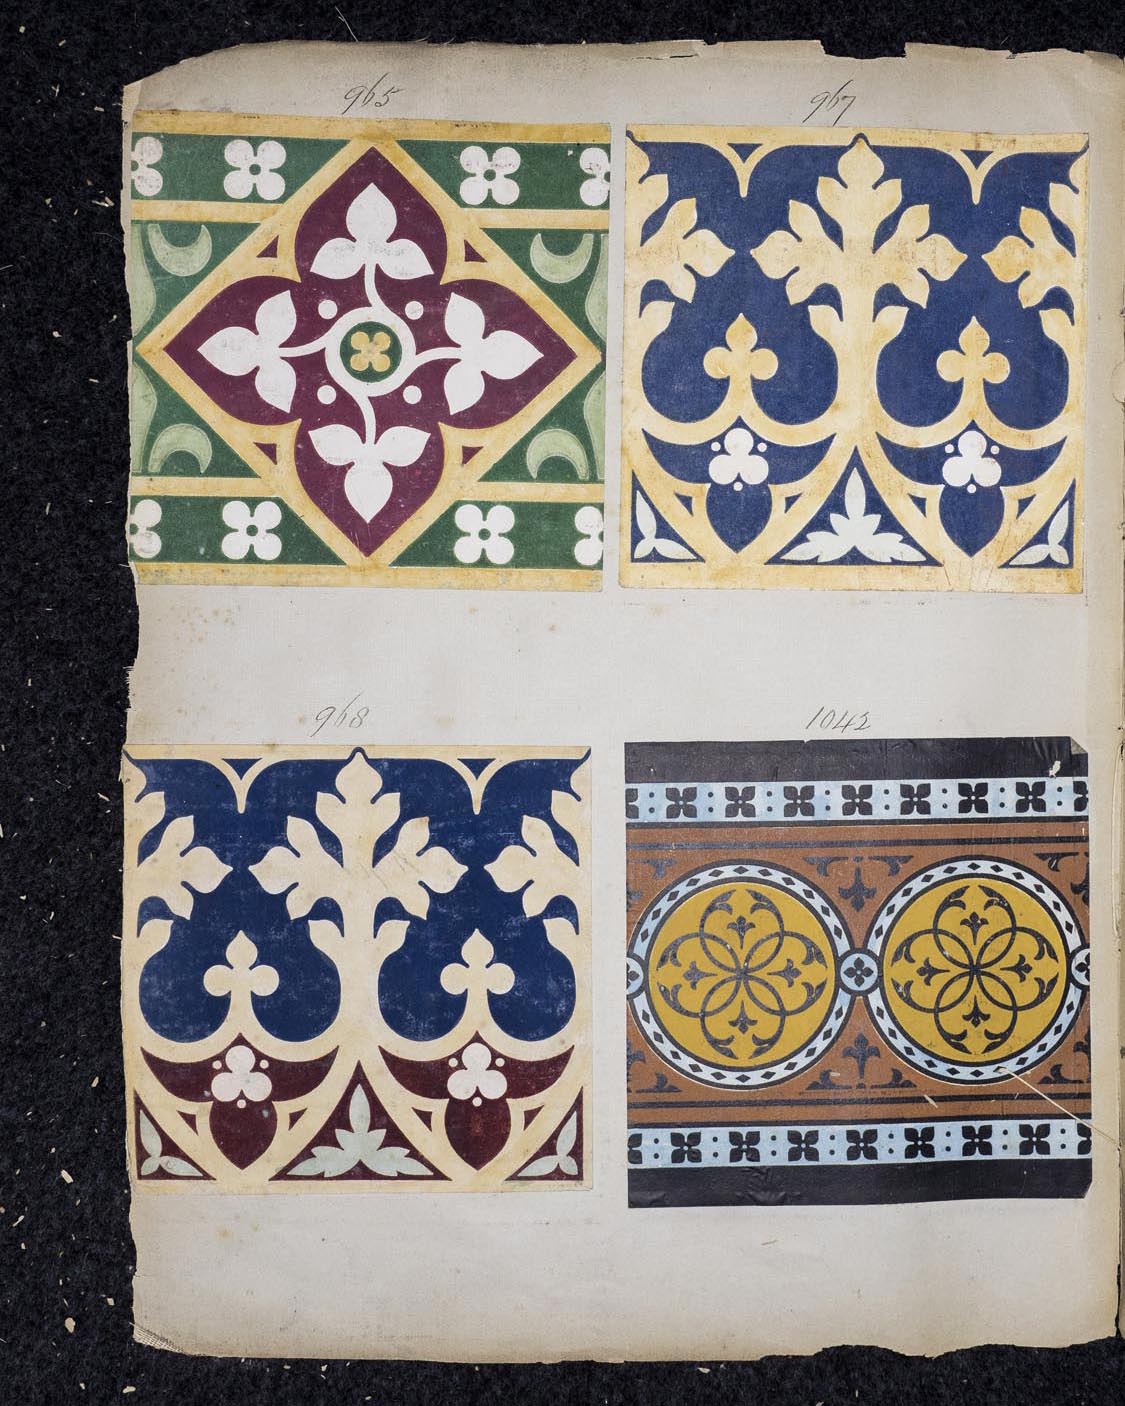 Well-worn books from the early 1800s show tile pattern illustrations by Herbert Minton